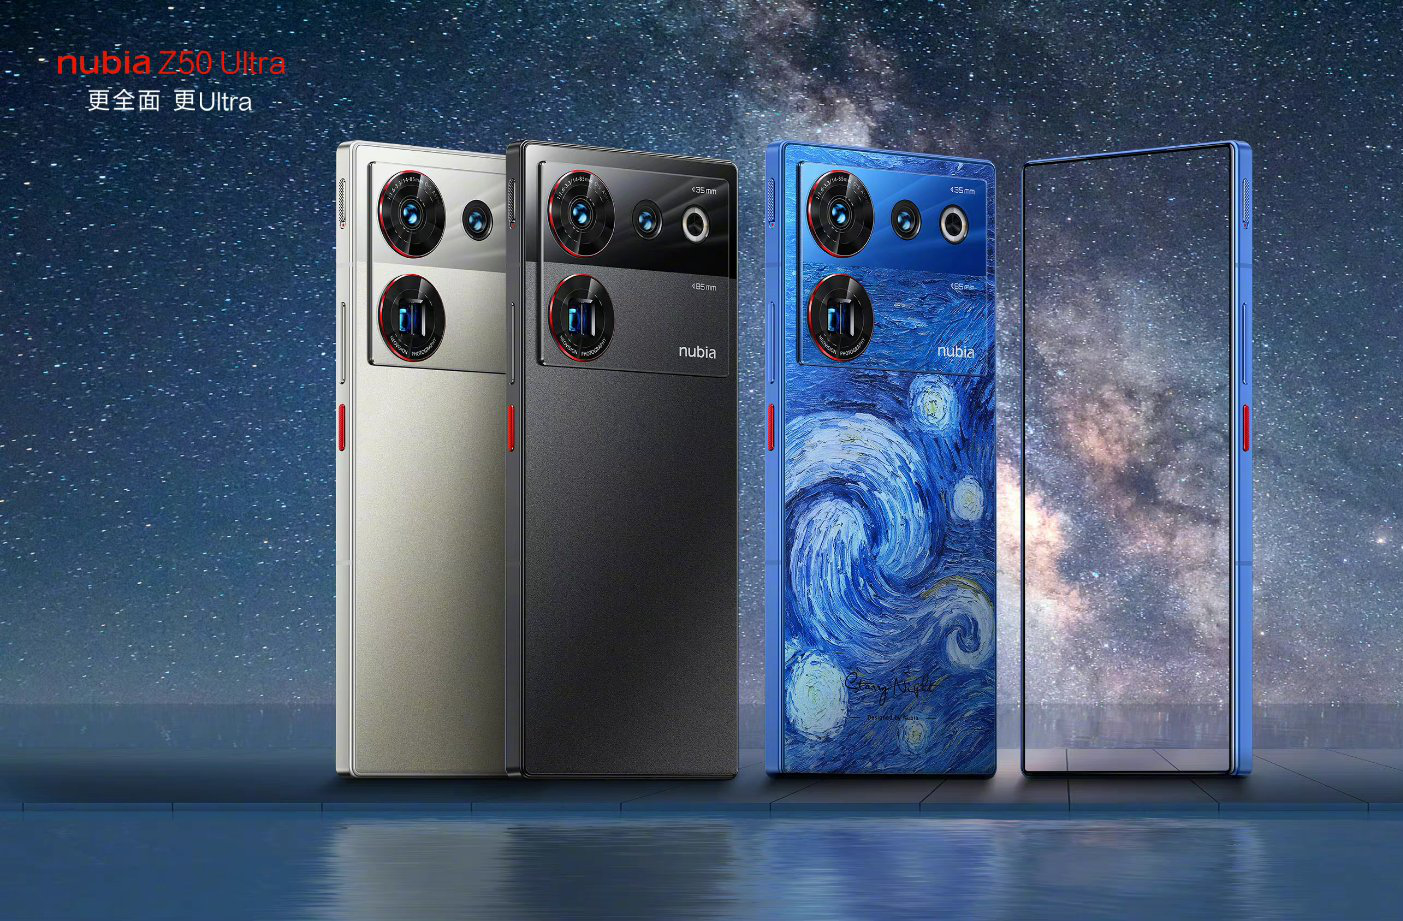 ZTE Nubia Z50 Ultra arrives as new flagship smartphone with impressive camera technology